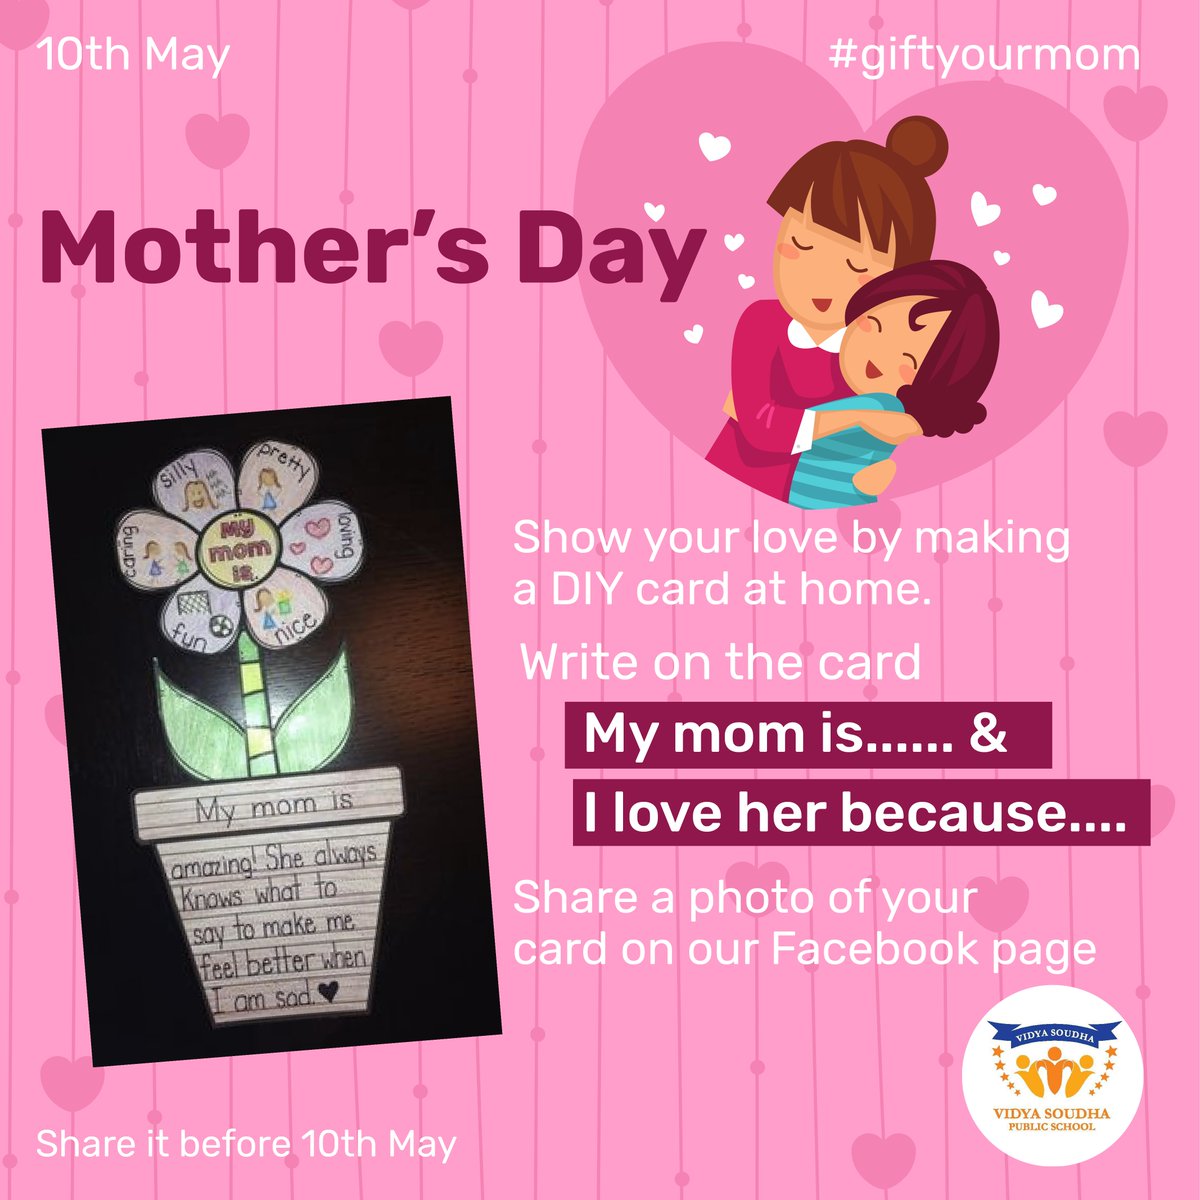 This Mother's day, voice just how much you love your Mom by making a DIY gift card at home that she will cherish. Express in a few words 'My mom is.....' and 'I love her because....'.

#mothersday #vidyasoudhapublicschool #giftyourmom